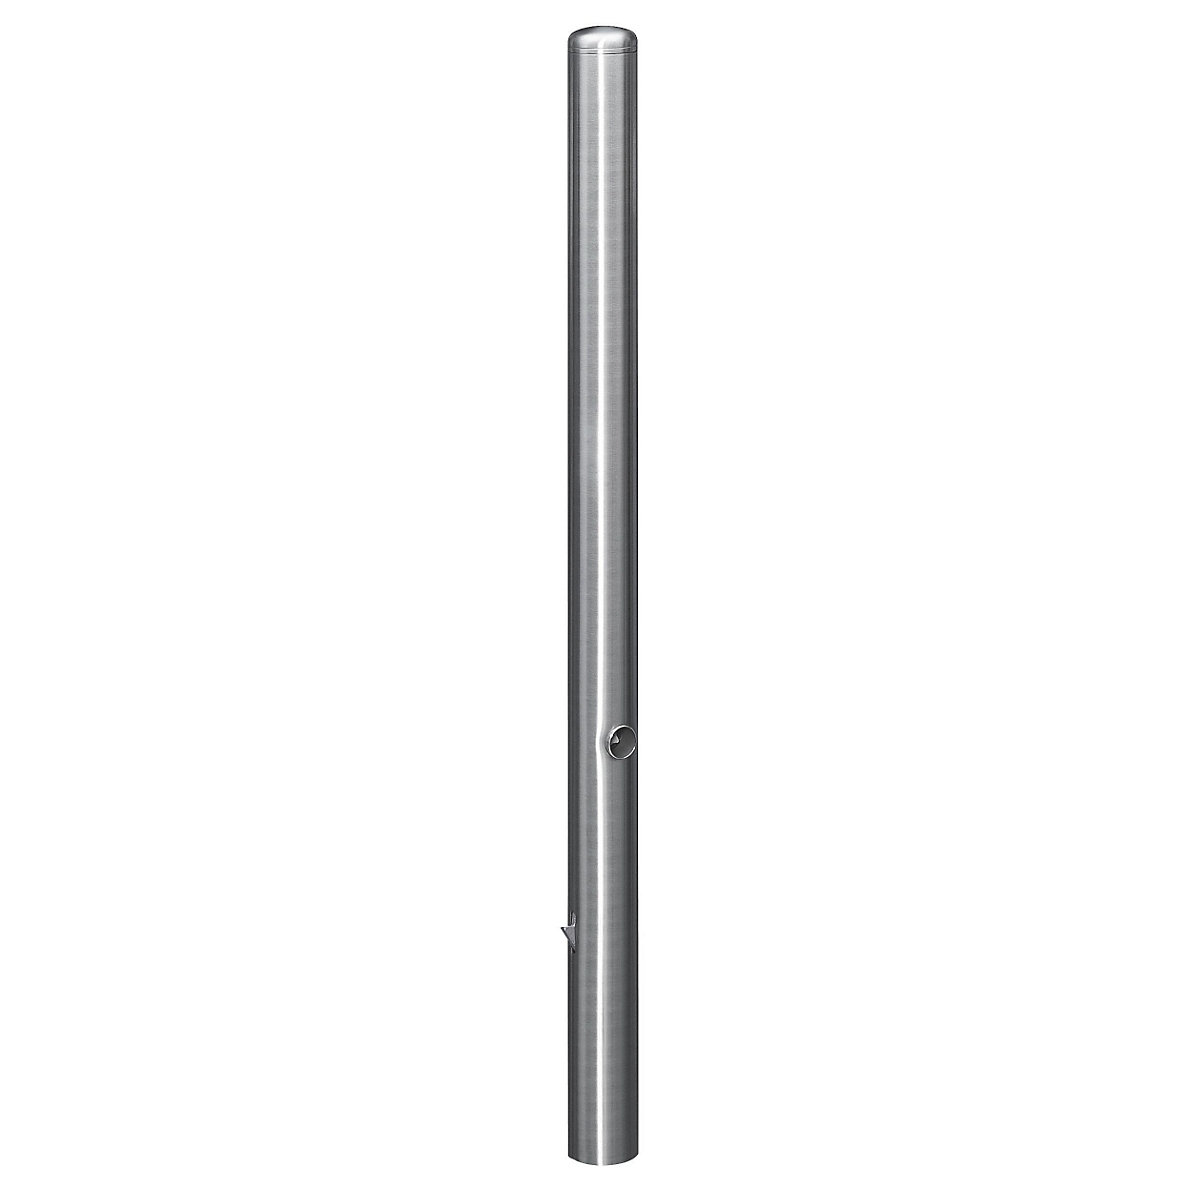 Stainless steel barrier post, with end cap, ground sleeve for concreting in, Ø 60 mm, triangular lock-4